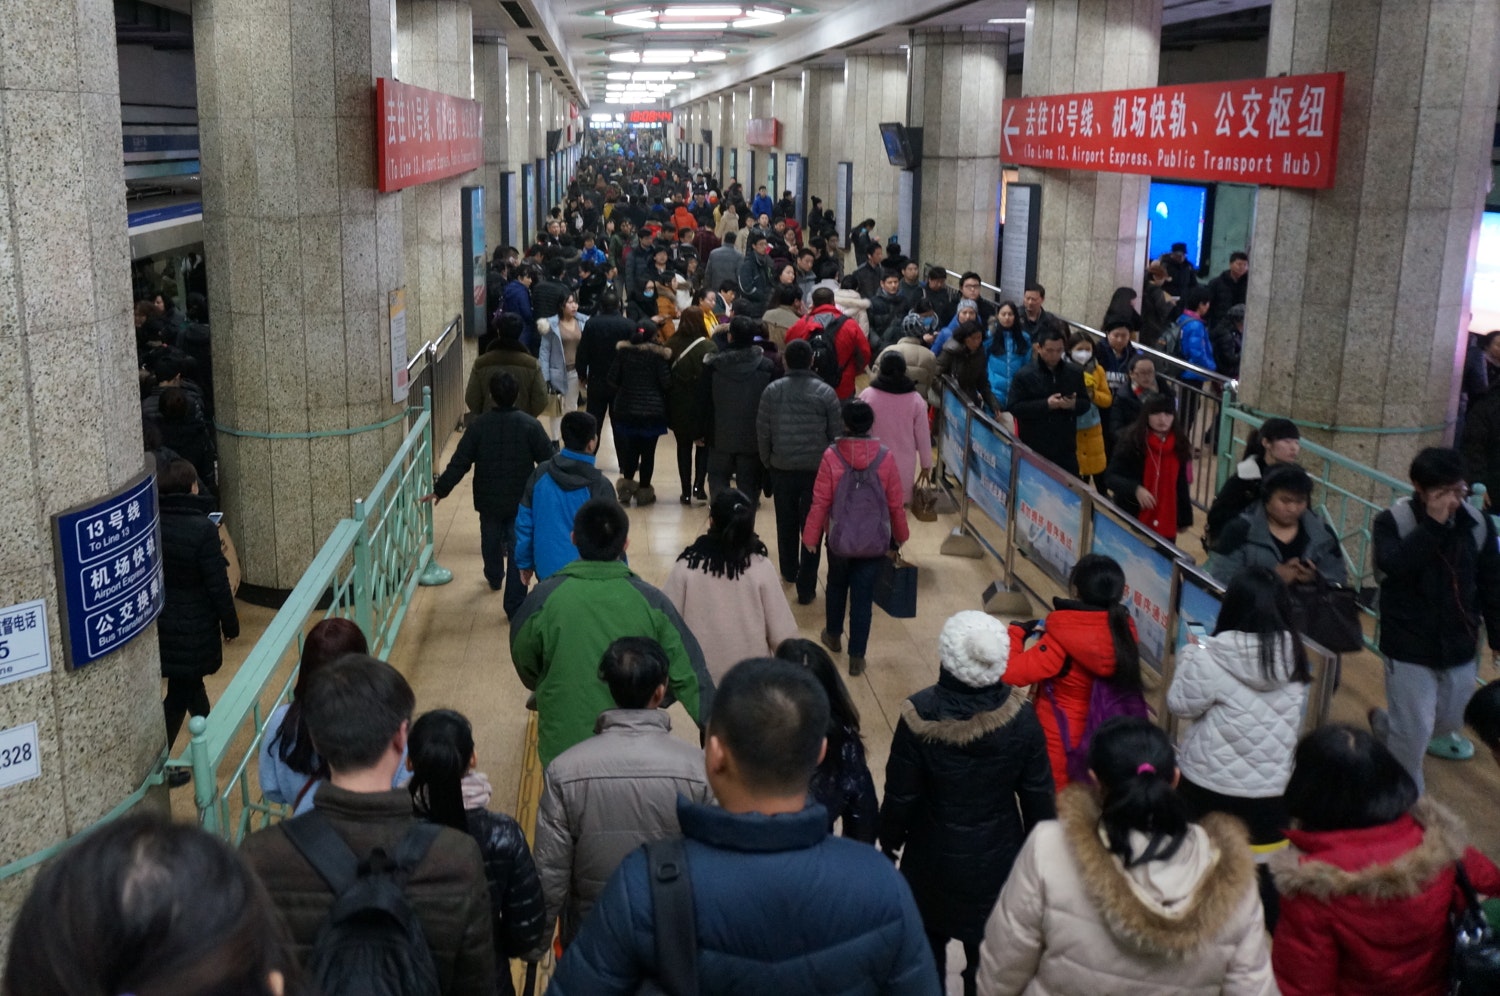 Crowded Beijing subway station. Image by Anita Isalska / Lonely Planet